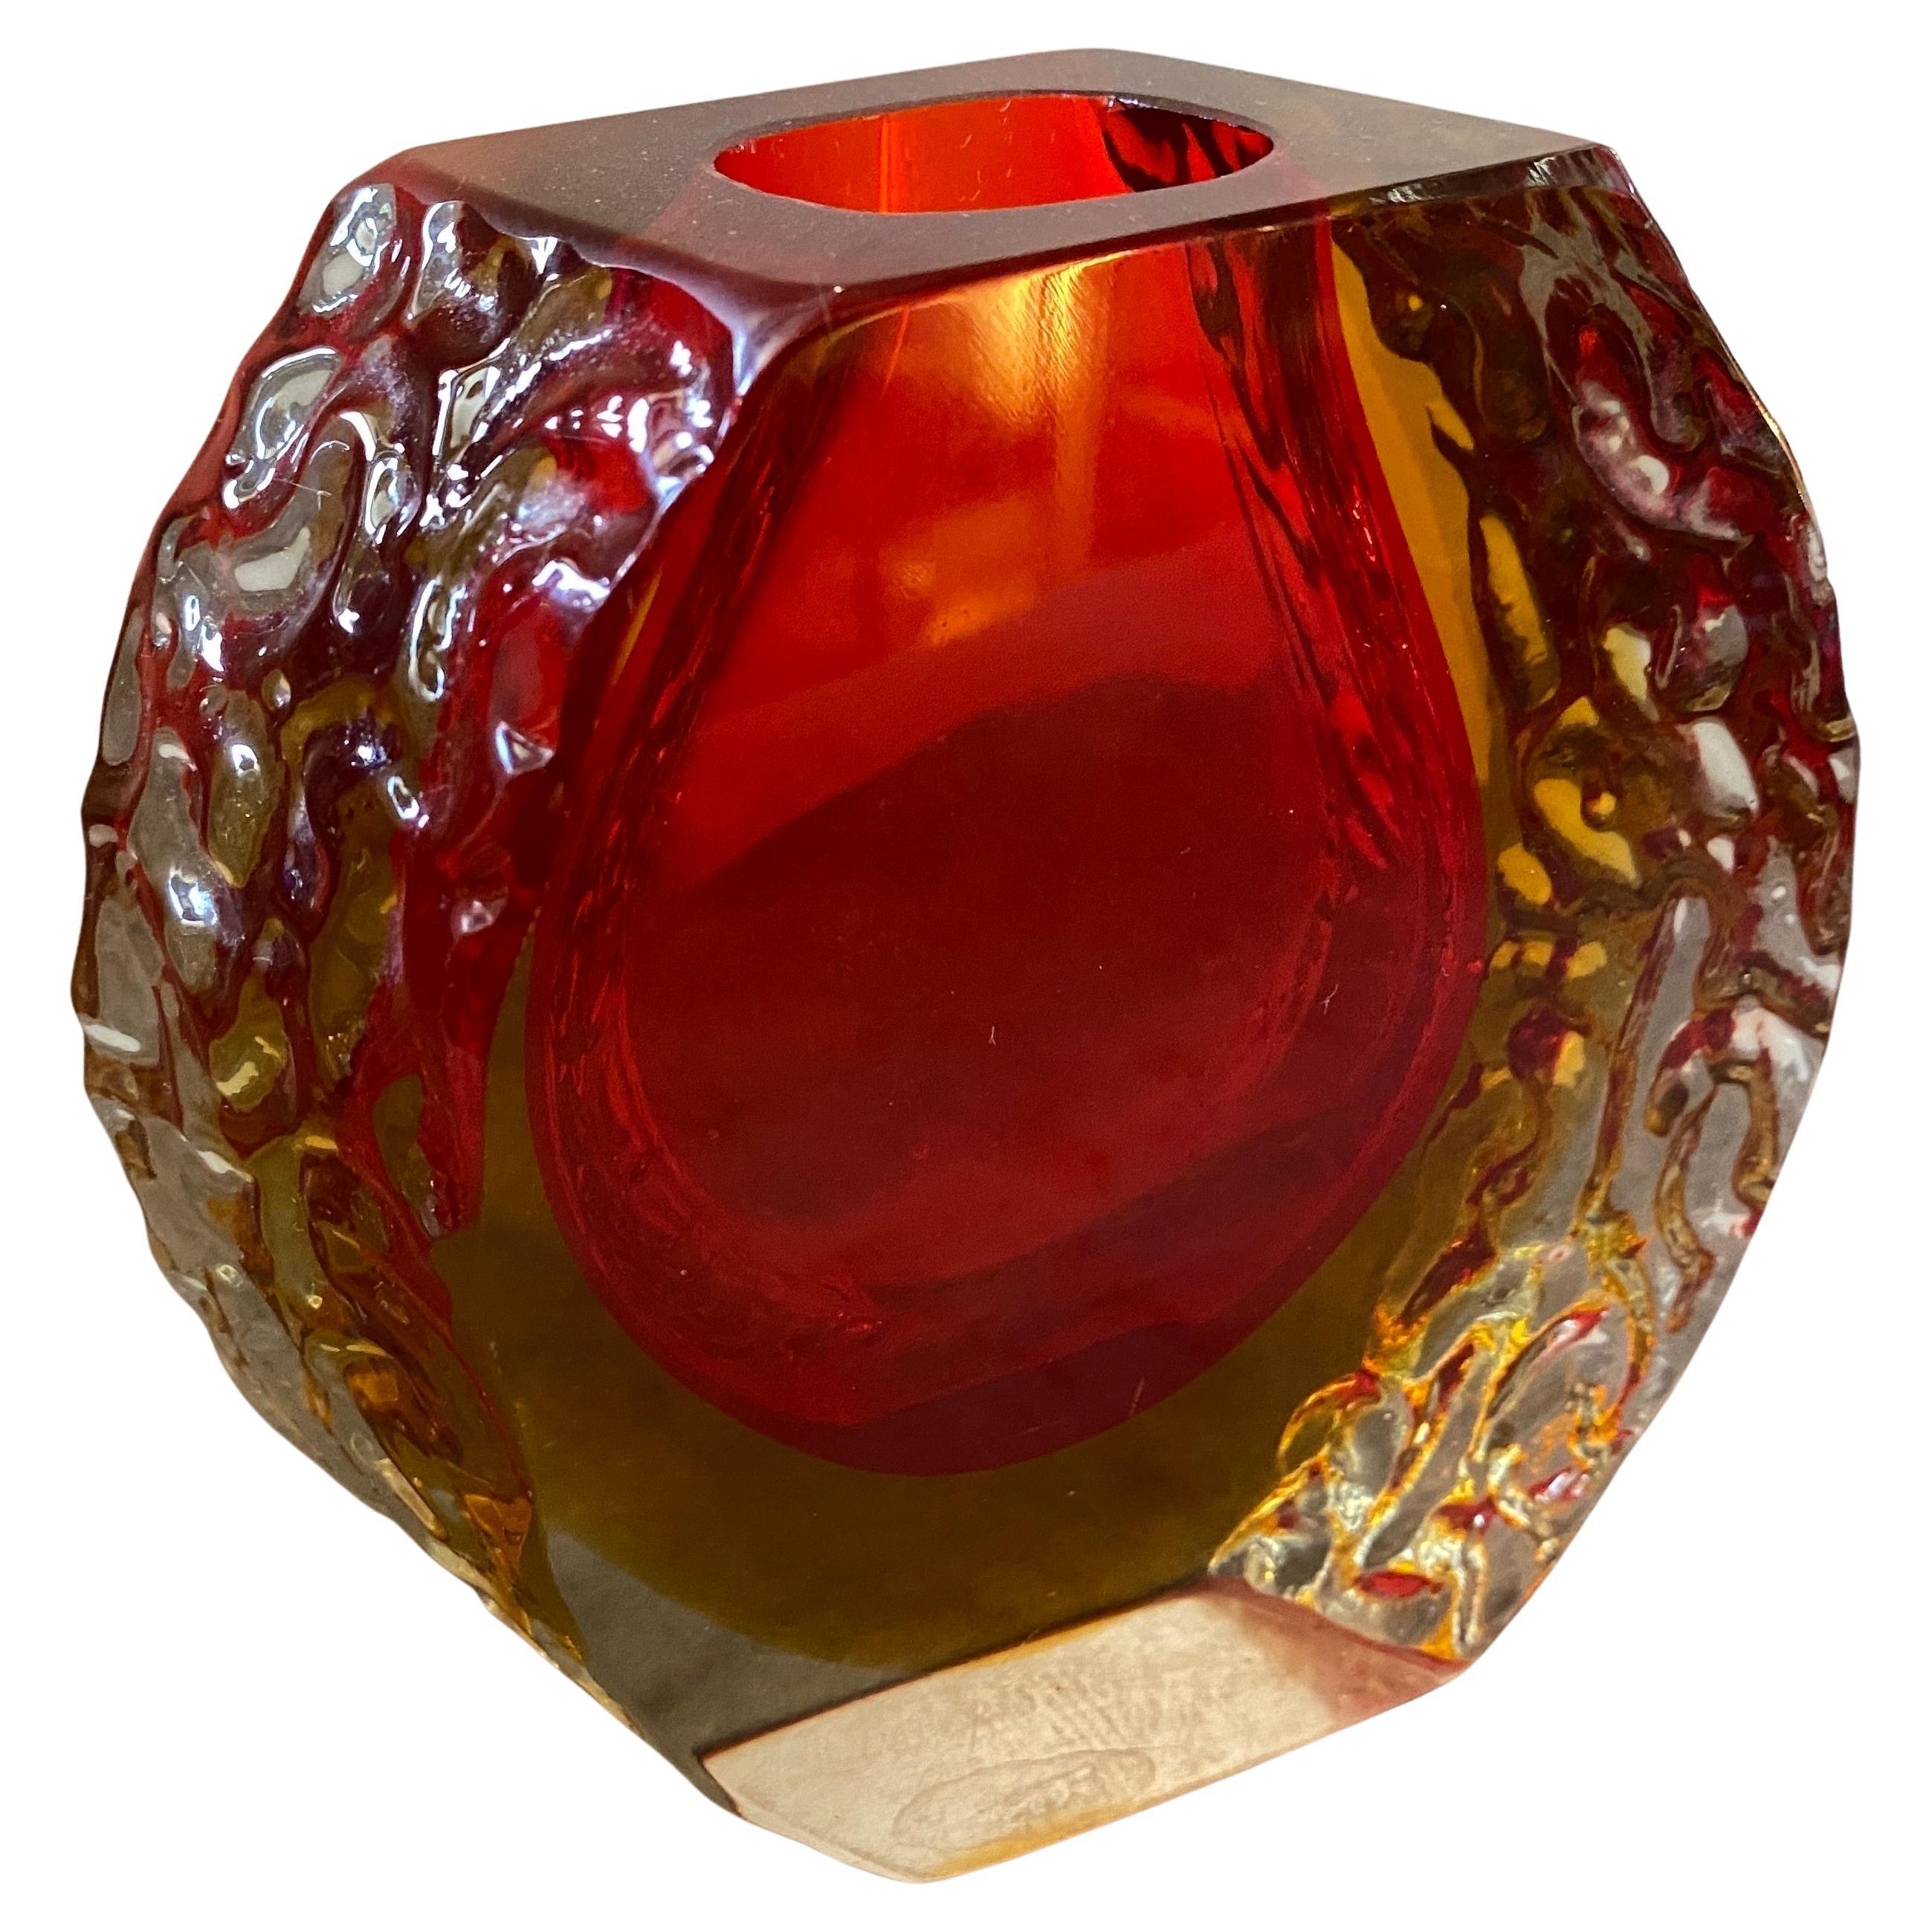 1960s Mandruzzato Mid-Century Modern Red and Yellow Sommerso Murano Glass Vase For Sale